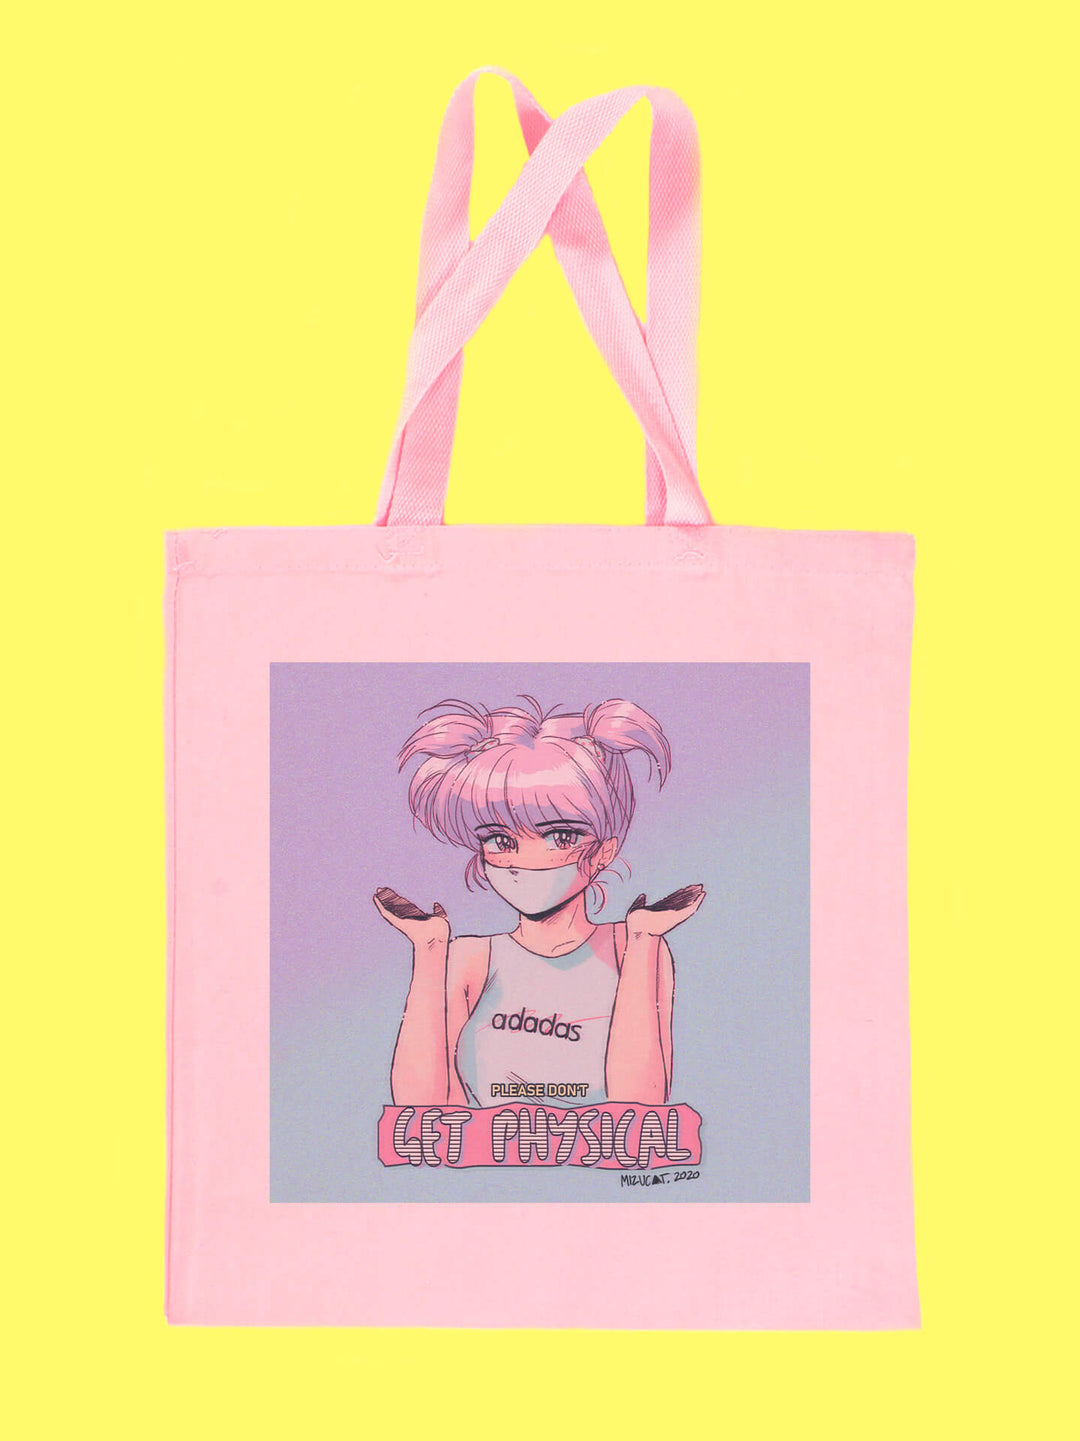 Retro anime aesthetic adidas babe pink canvas book tote.